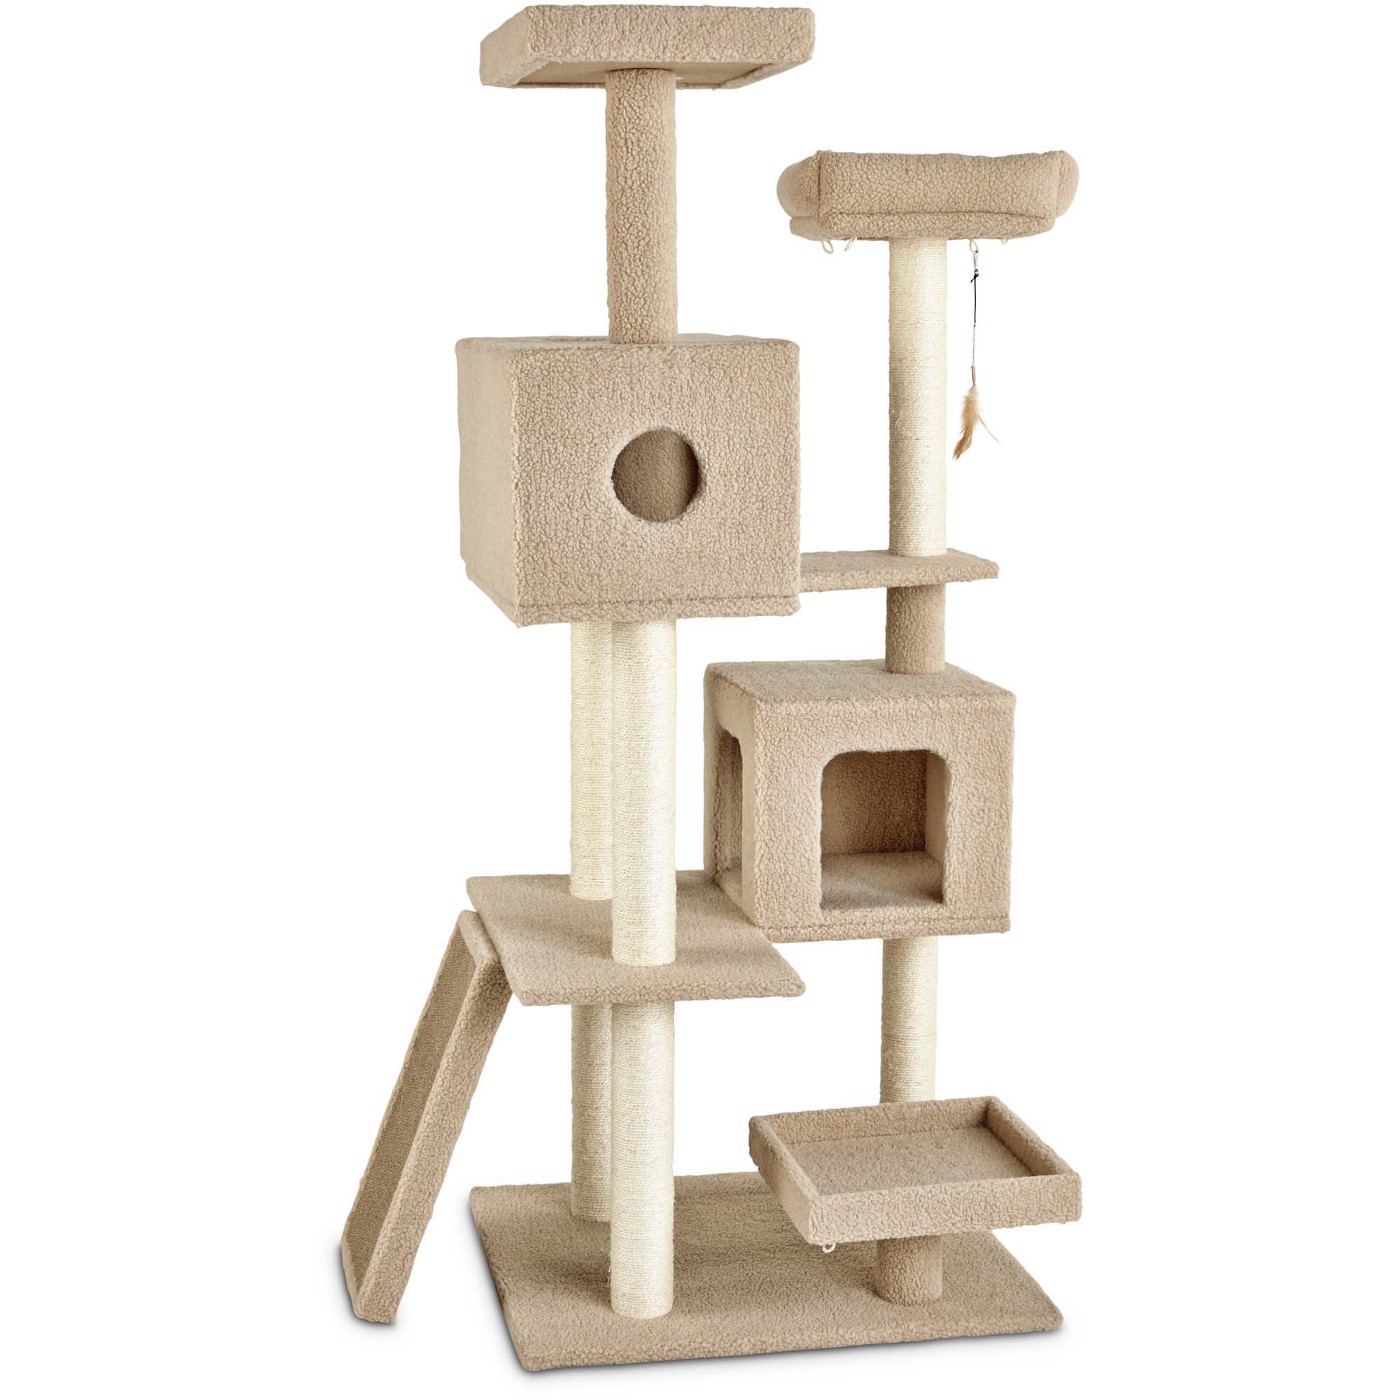 This is a “cat tree”